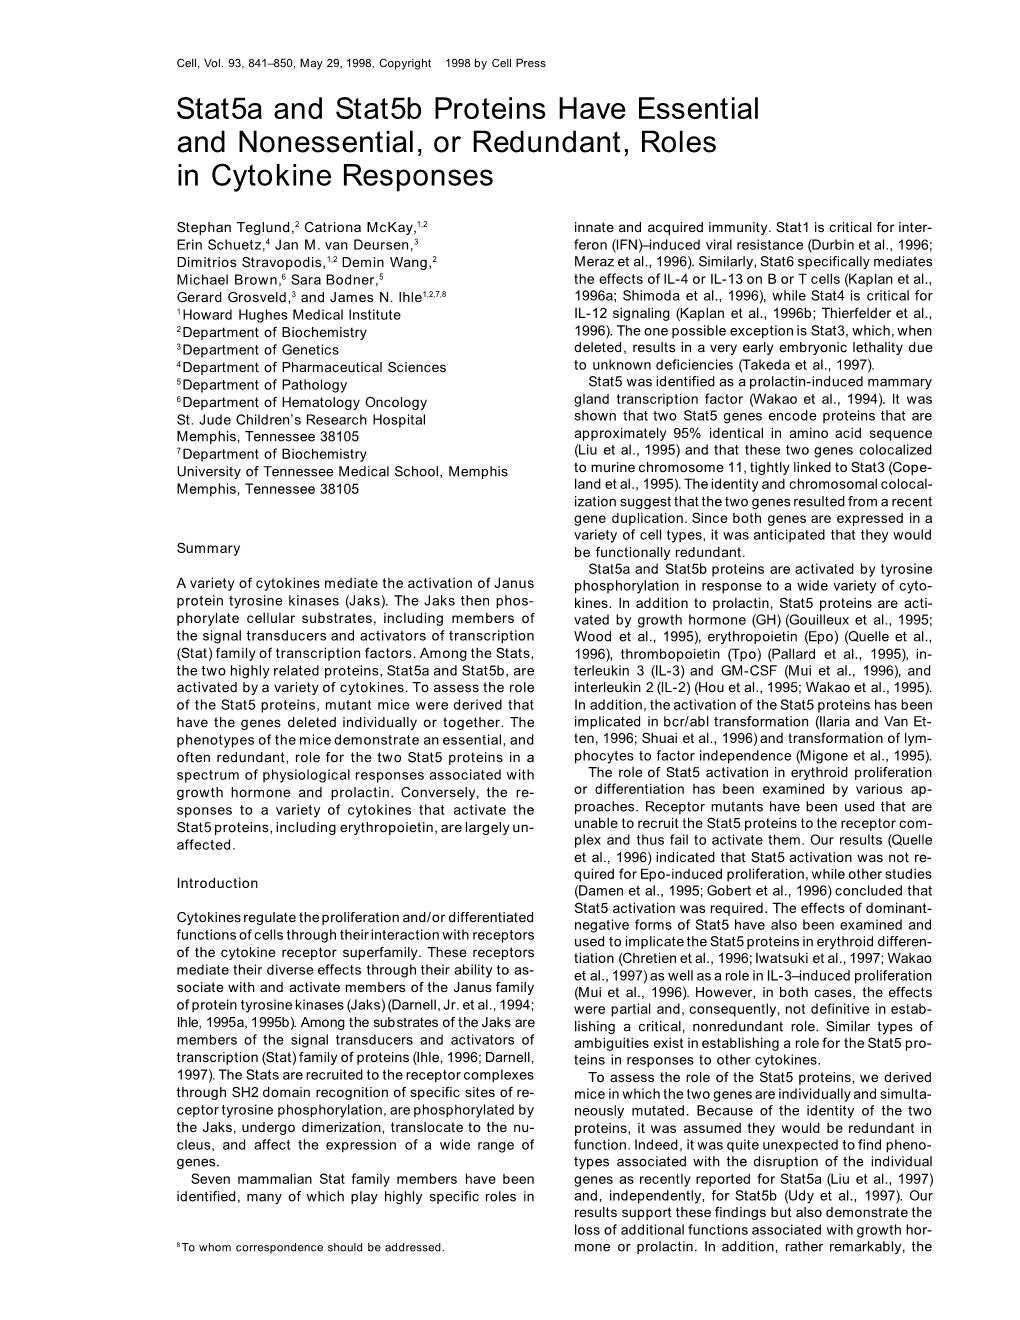 Stat5a and Stat5b Proteins Have Essential and Nonessential, Or Redundant, Roles in Cytokine Responses